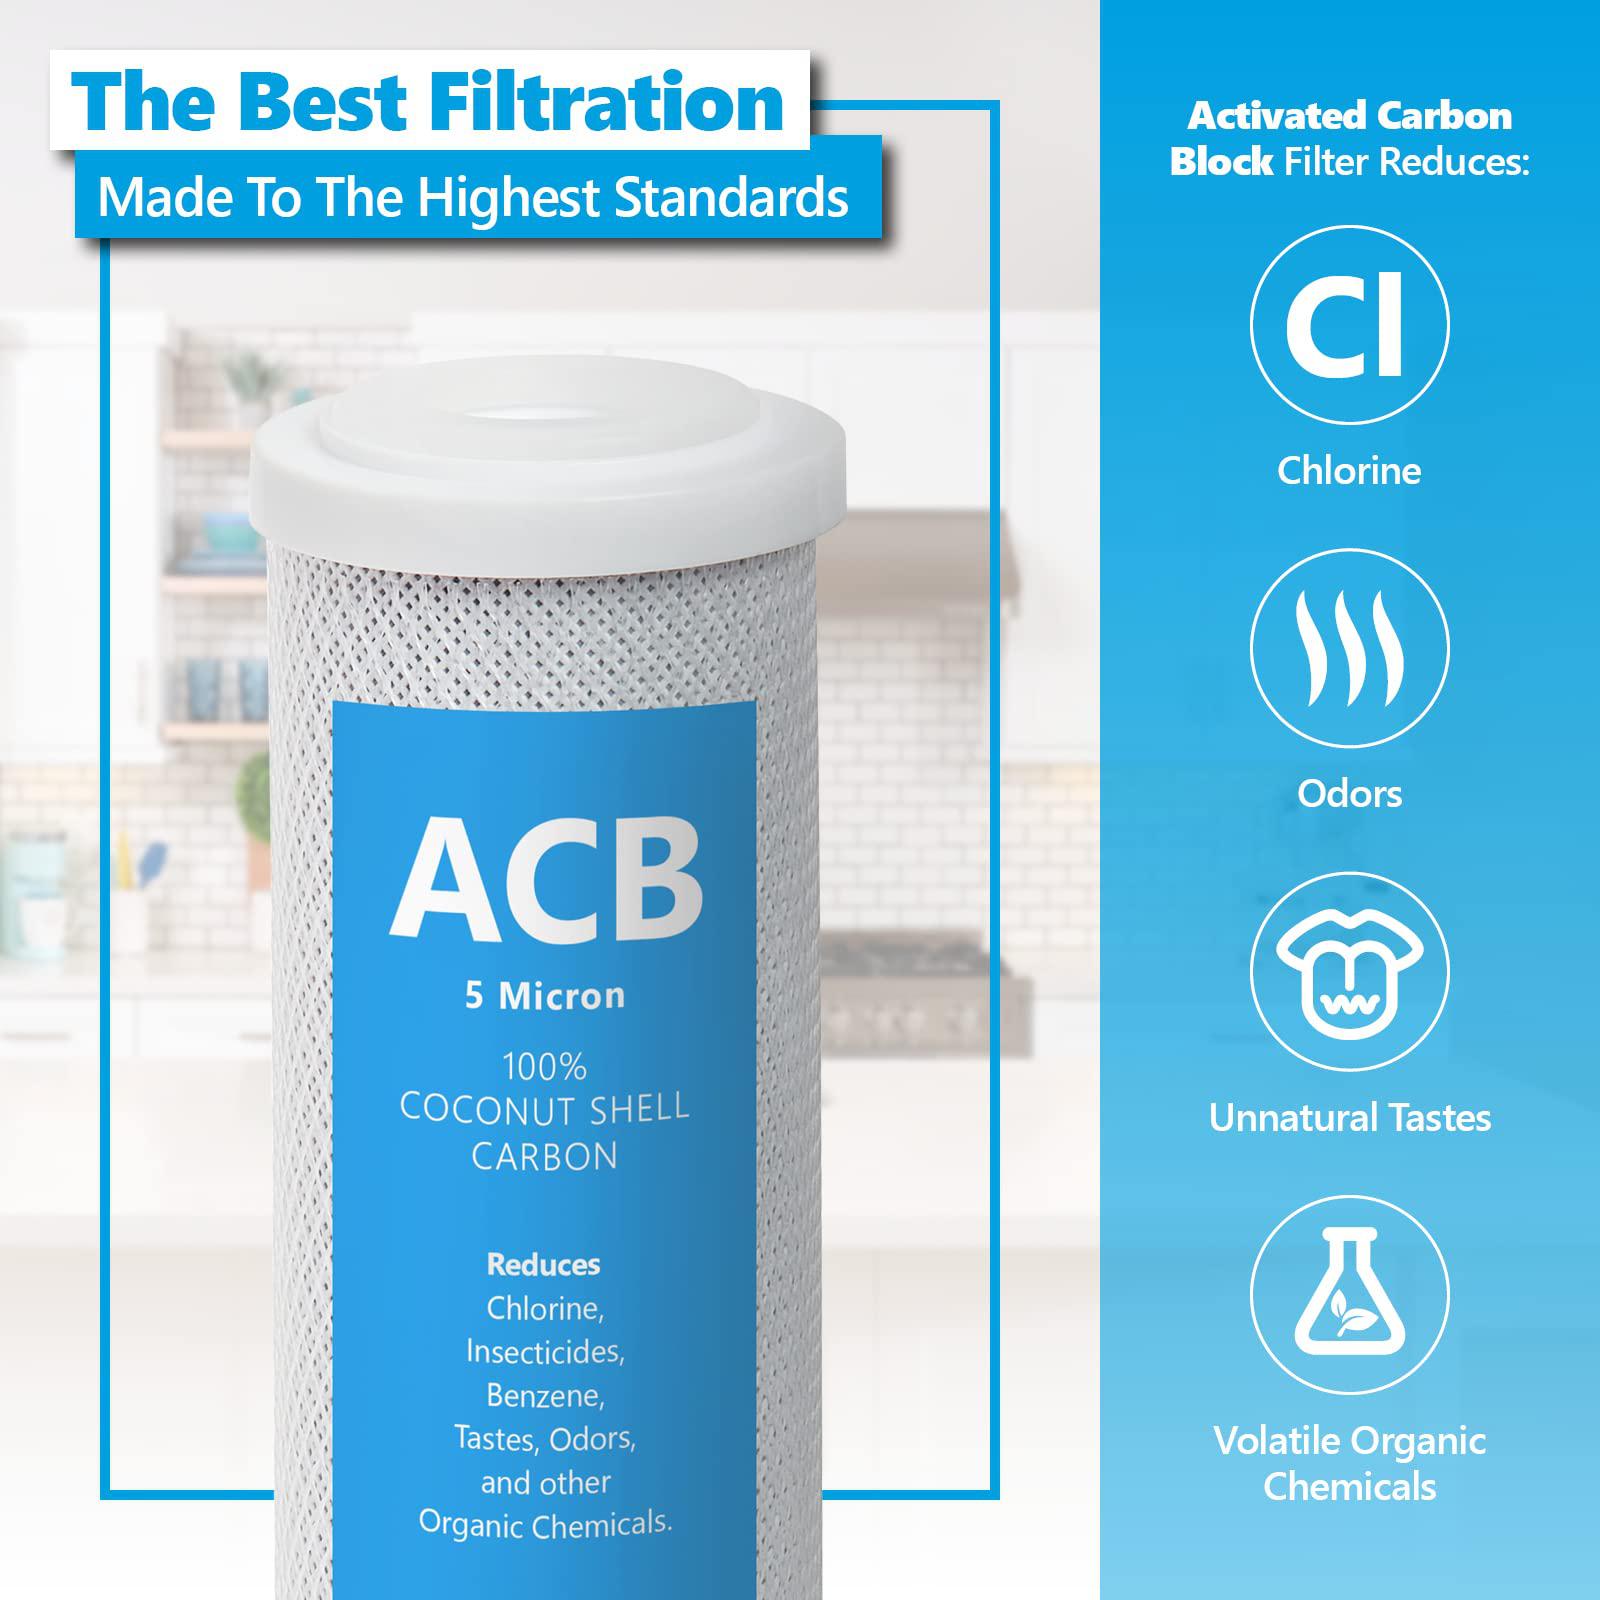 Express Water 10 pack activated carbon block acb water filter replacement - 5 micron, 10 inch filter - under sink and reverse osmosis syste